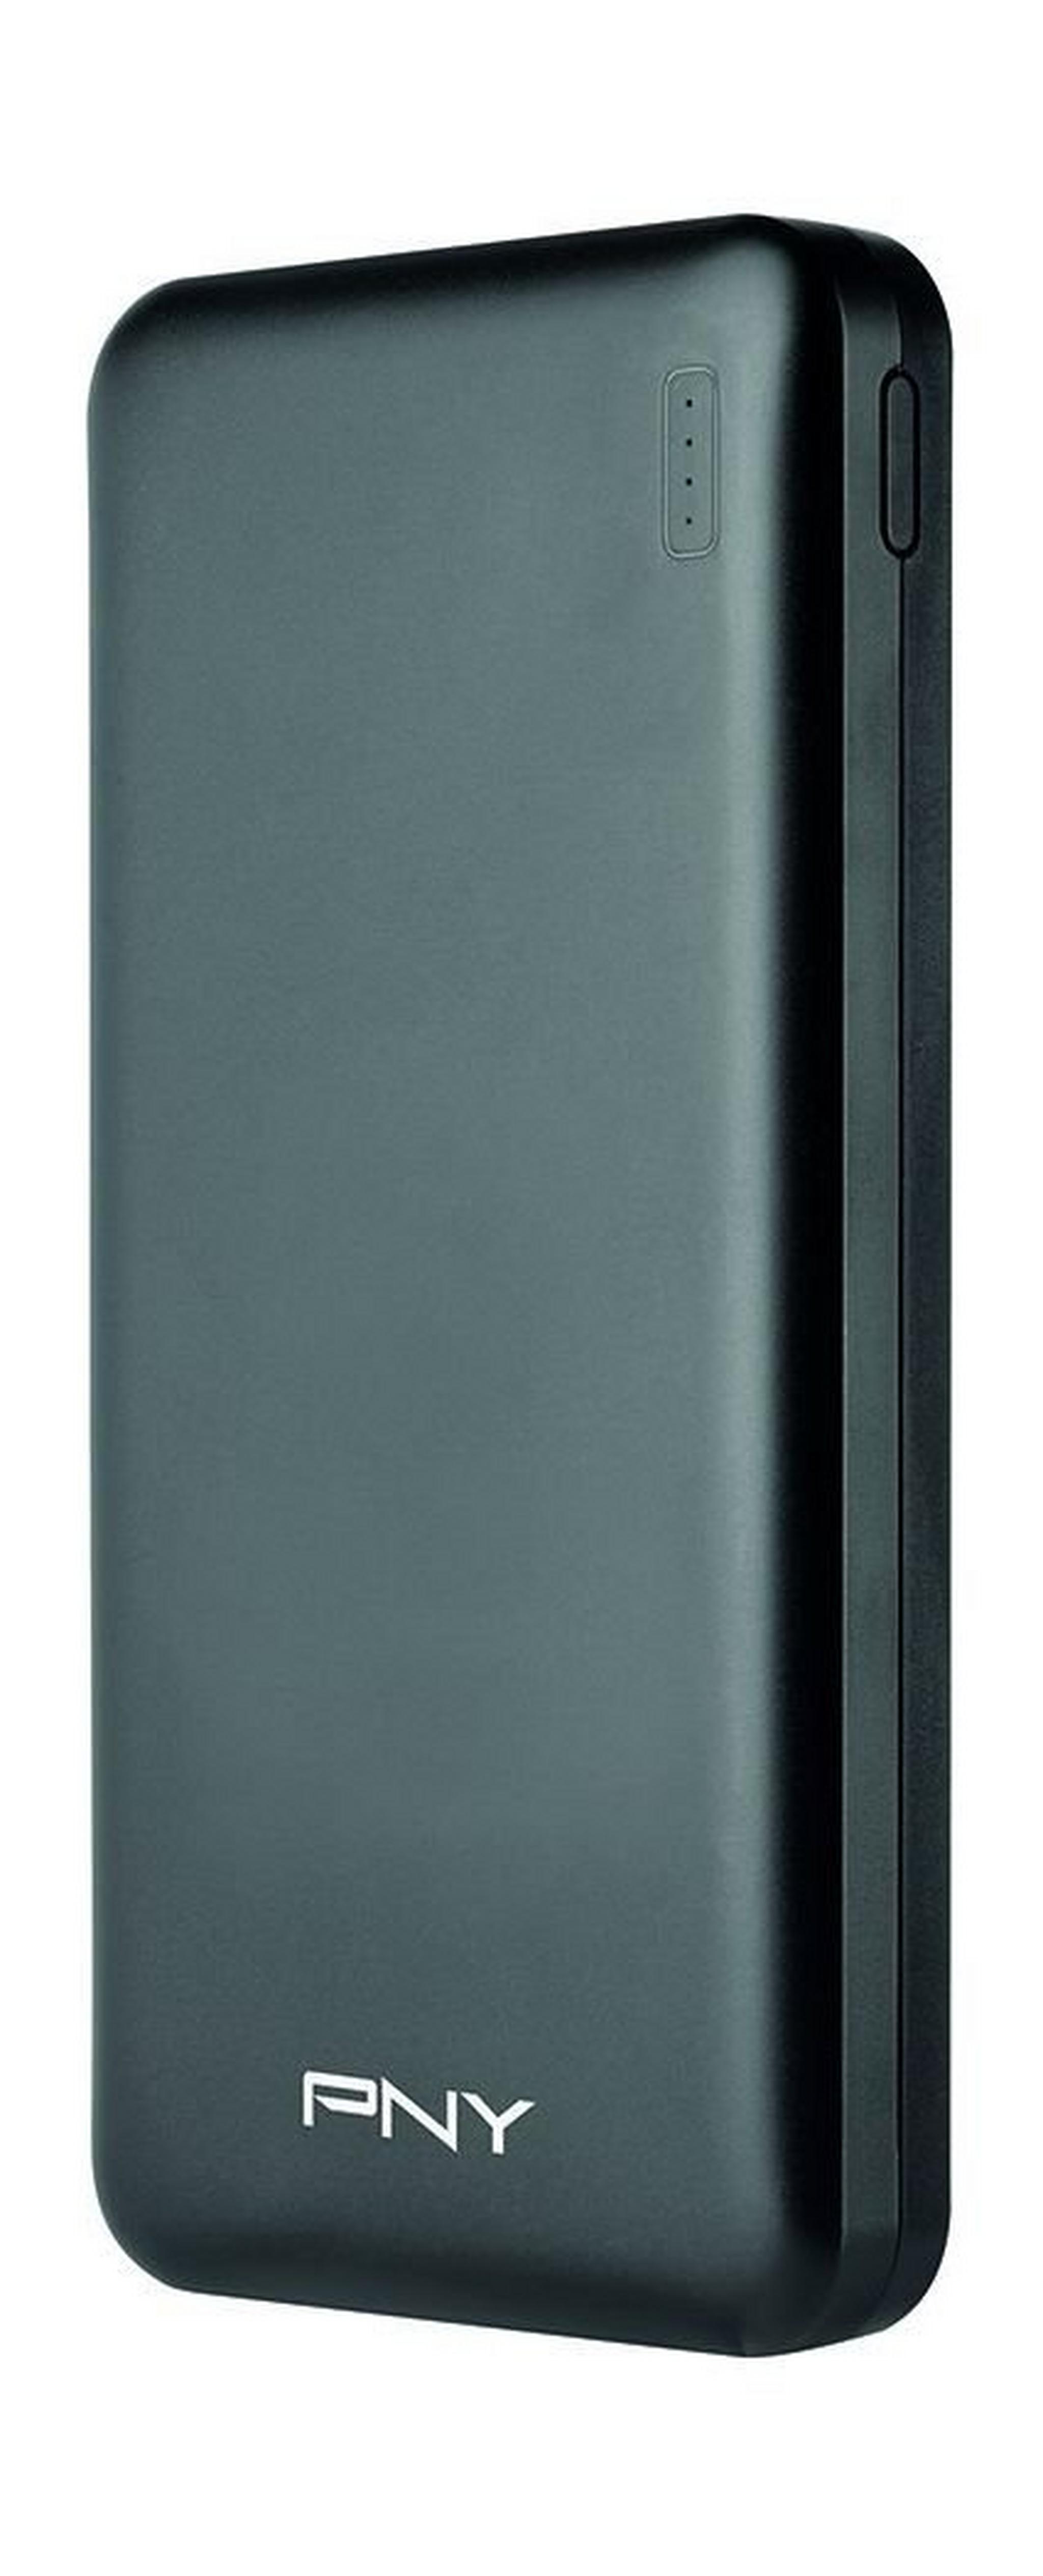 PNY Slim 10000 mAh PowerPack Portable Smartphone Battery Charger - Black